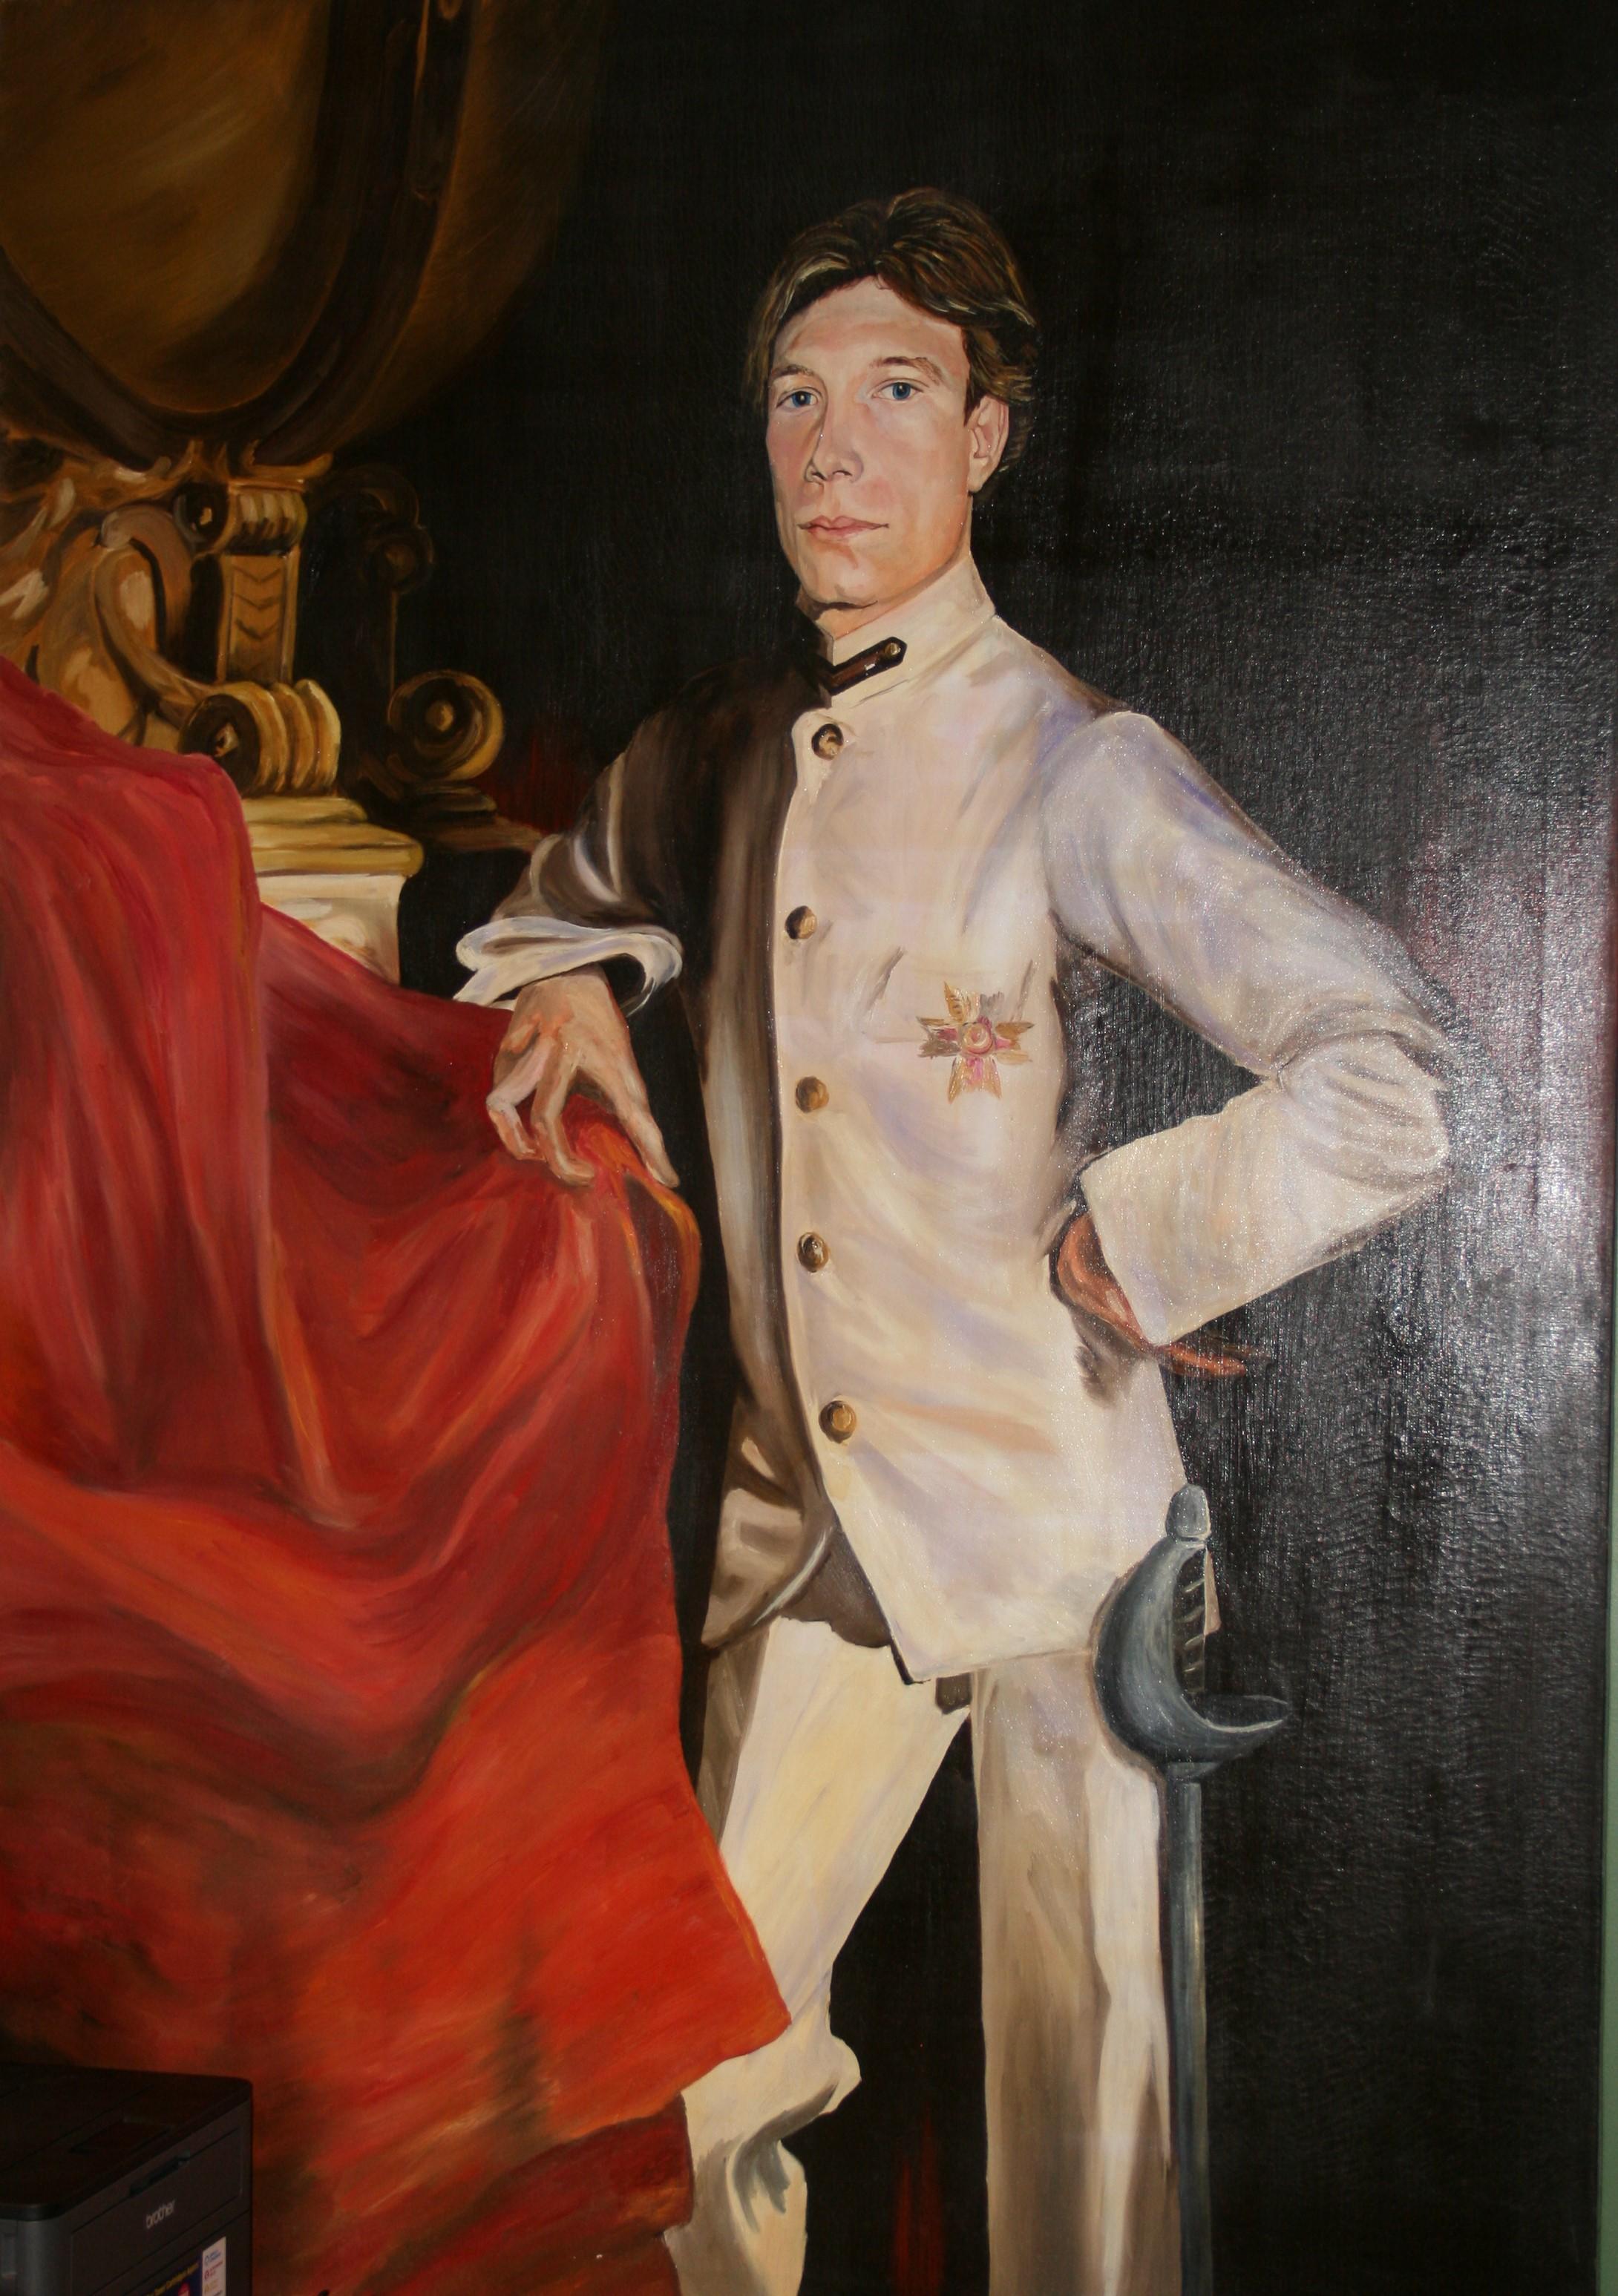 5058 Full length oversized oil painting of an English Nobleman
Set in a rapped canvas noframe needed
Signed Robert Yarmola